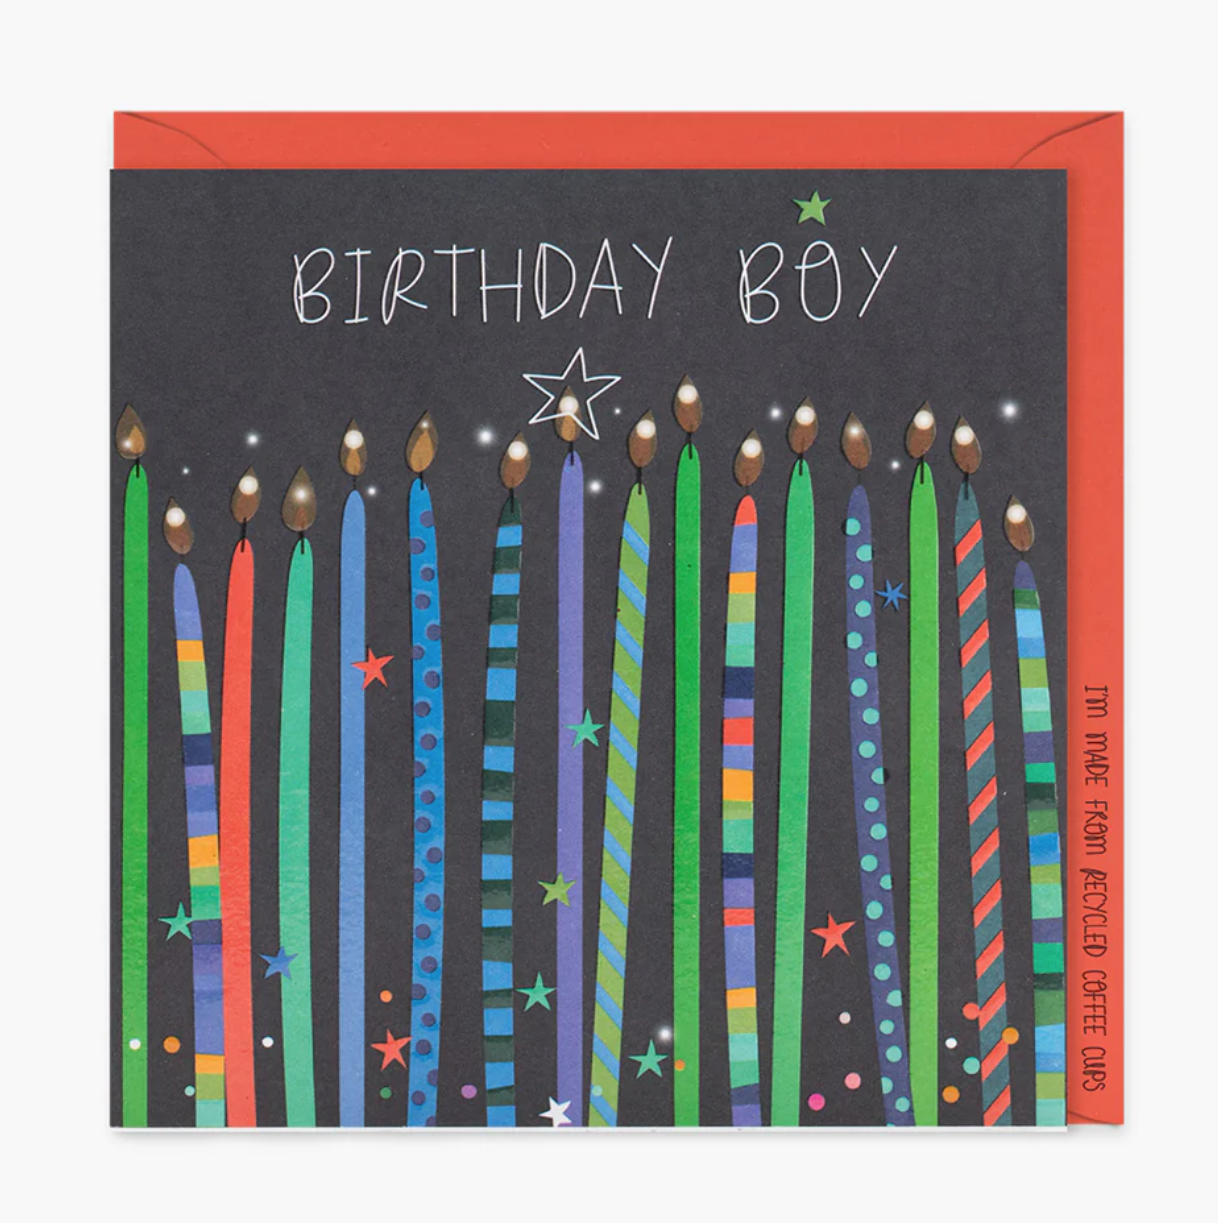 Belly Button Birthday Boy Candles SMALL Card